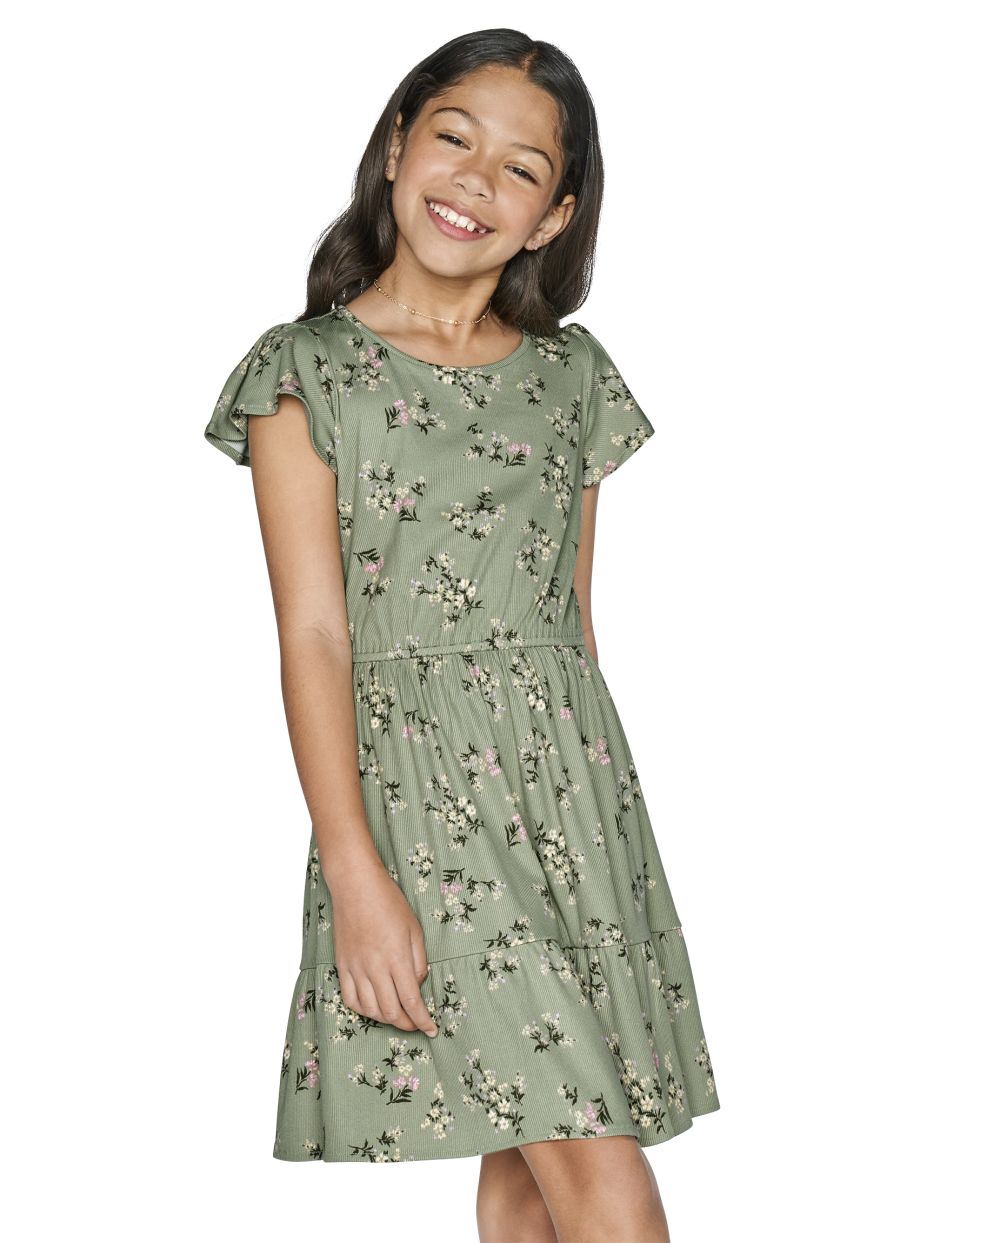 Girls Floral Print Short Sleeves Sleeves Above the Knee Tiered Dress With Ruffles